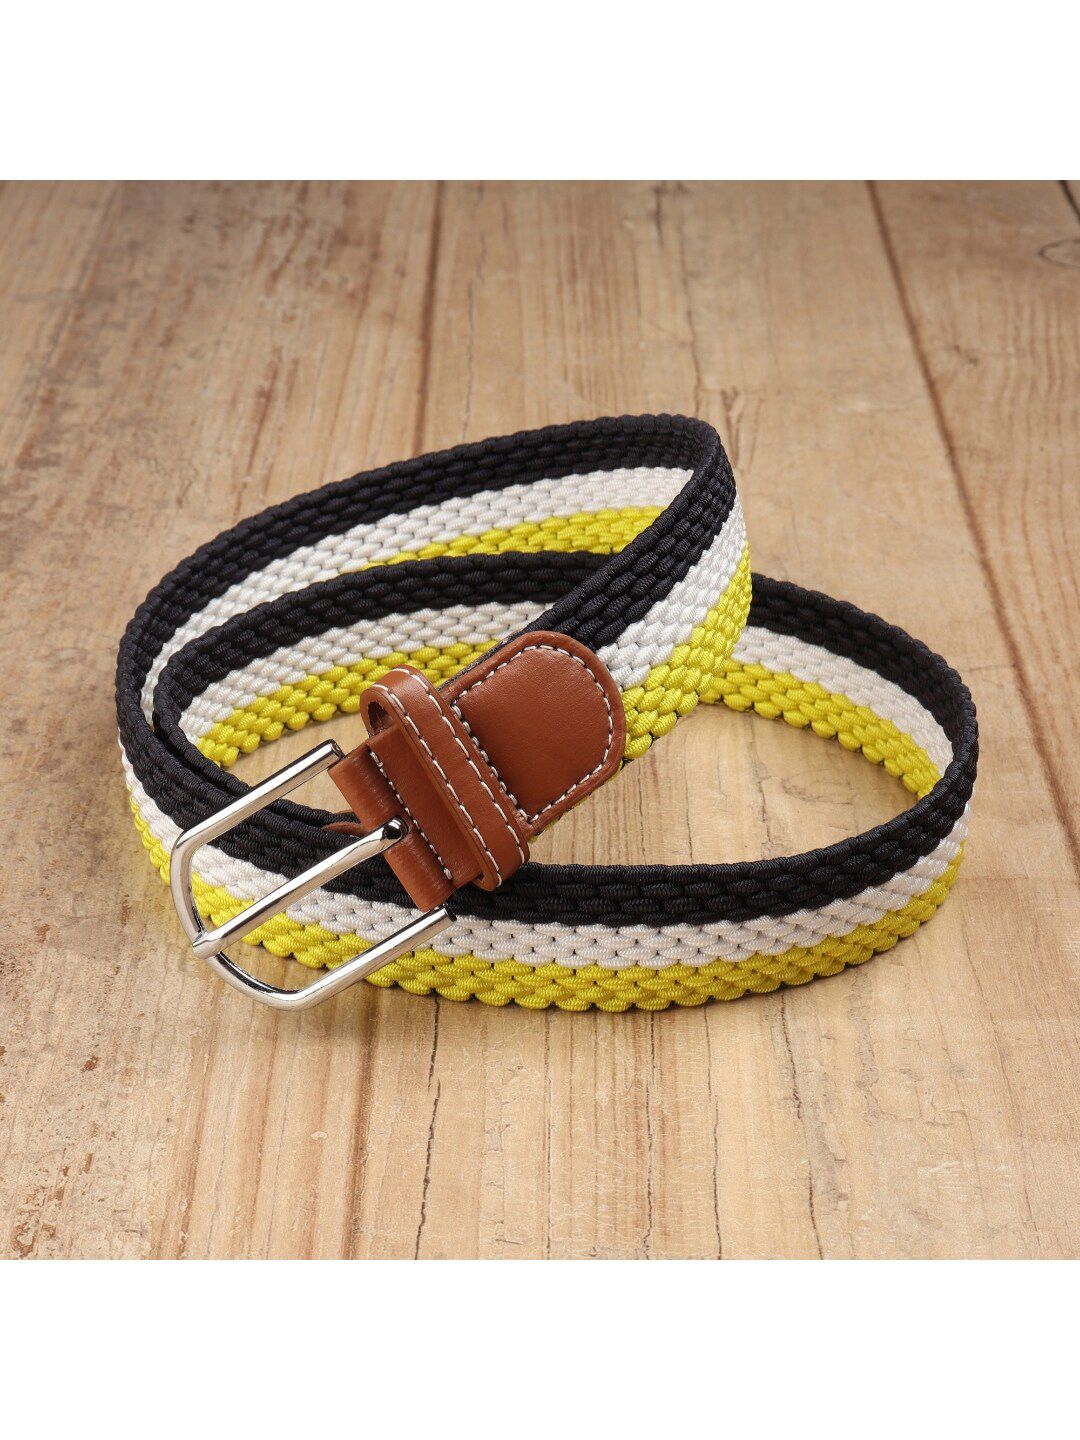 Elite Crafts Unisex Yellow Braided Woven Canvas Belt Price in India